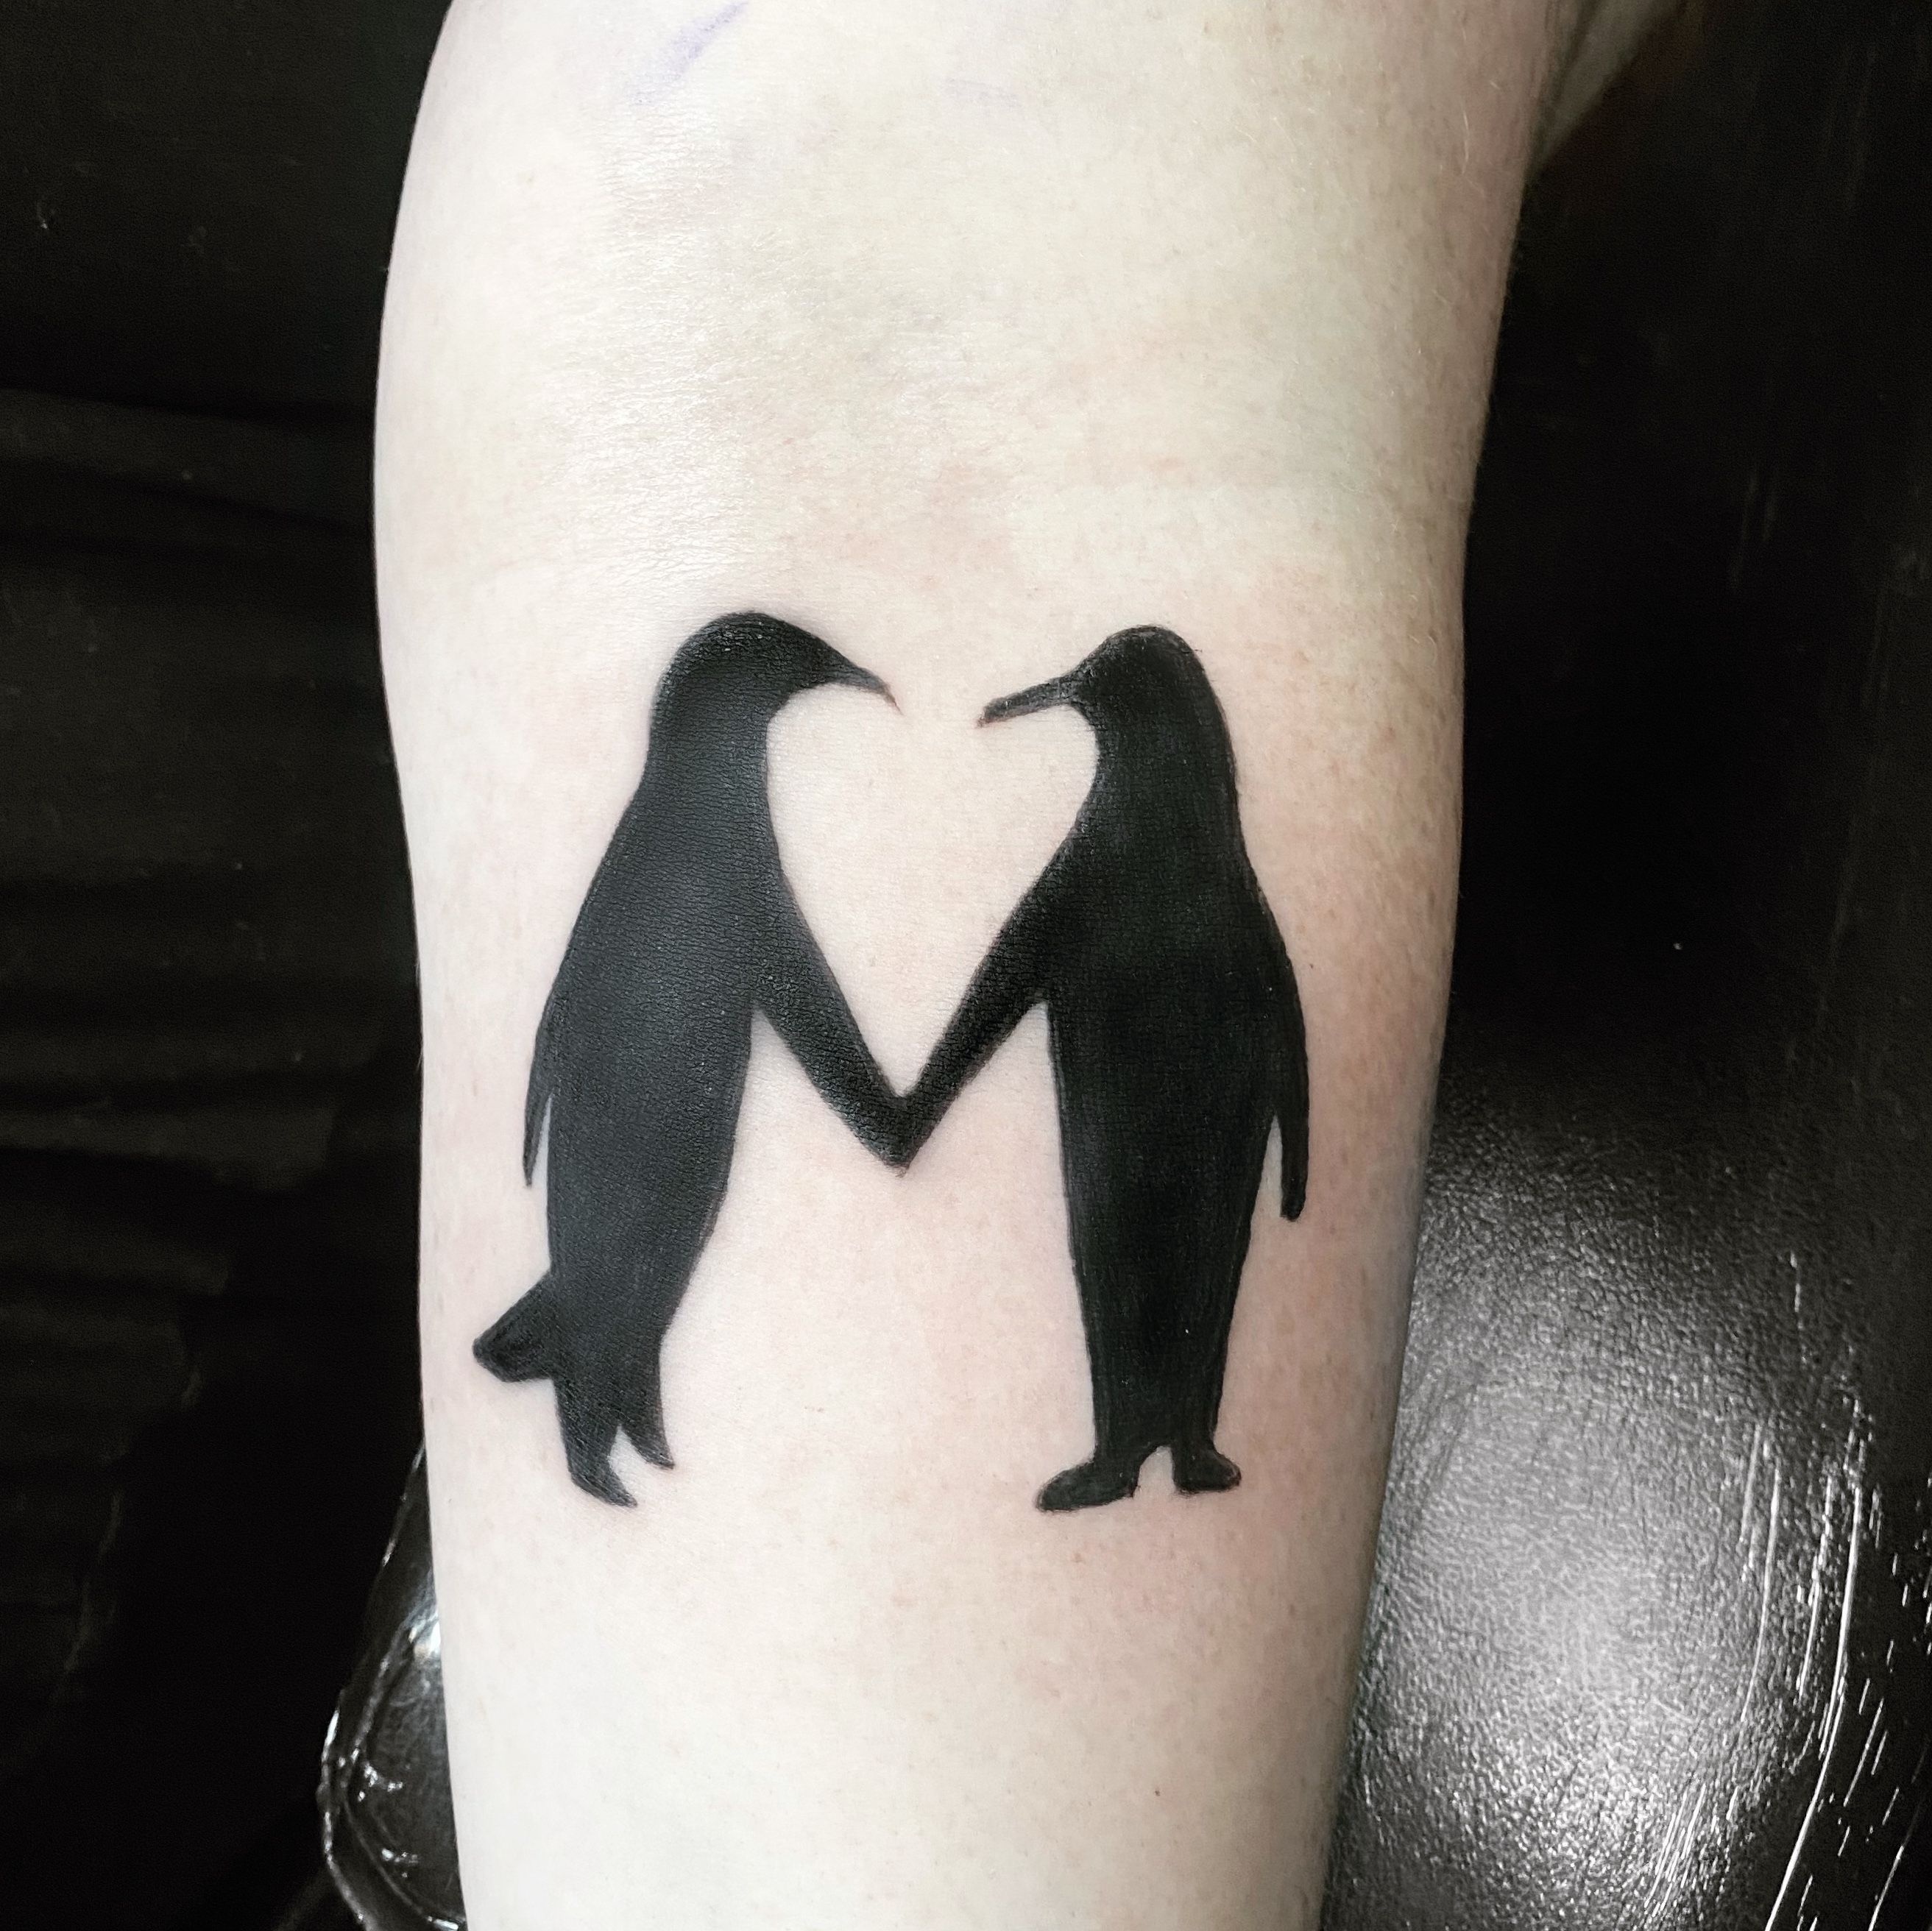 Cthulhu Rising Tattoo and Piercing  Awwww look how super cute these  couples matching Penguin tattoos are absolutely adorable  Matching  wrist tattoos by Papa   tattoo wrist wristtattoo wristtattoos  matchingtattoos 